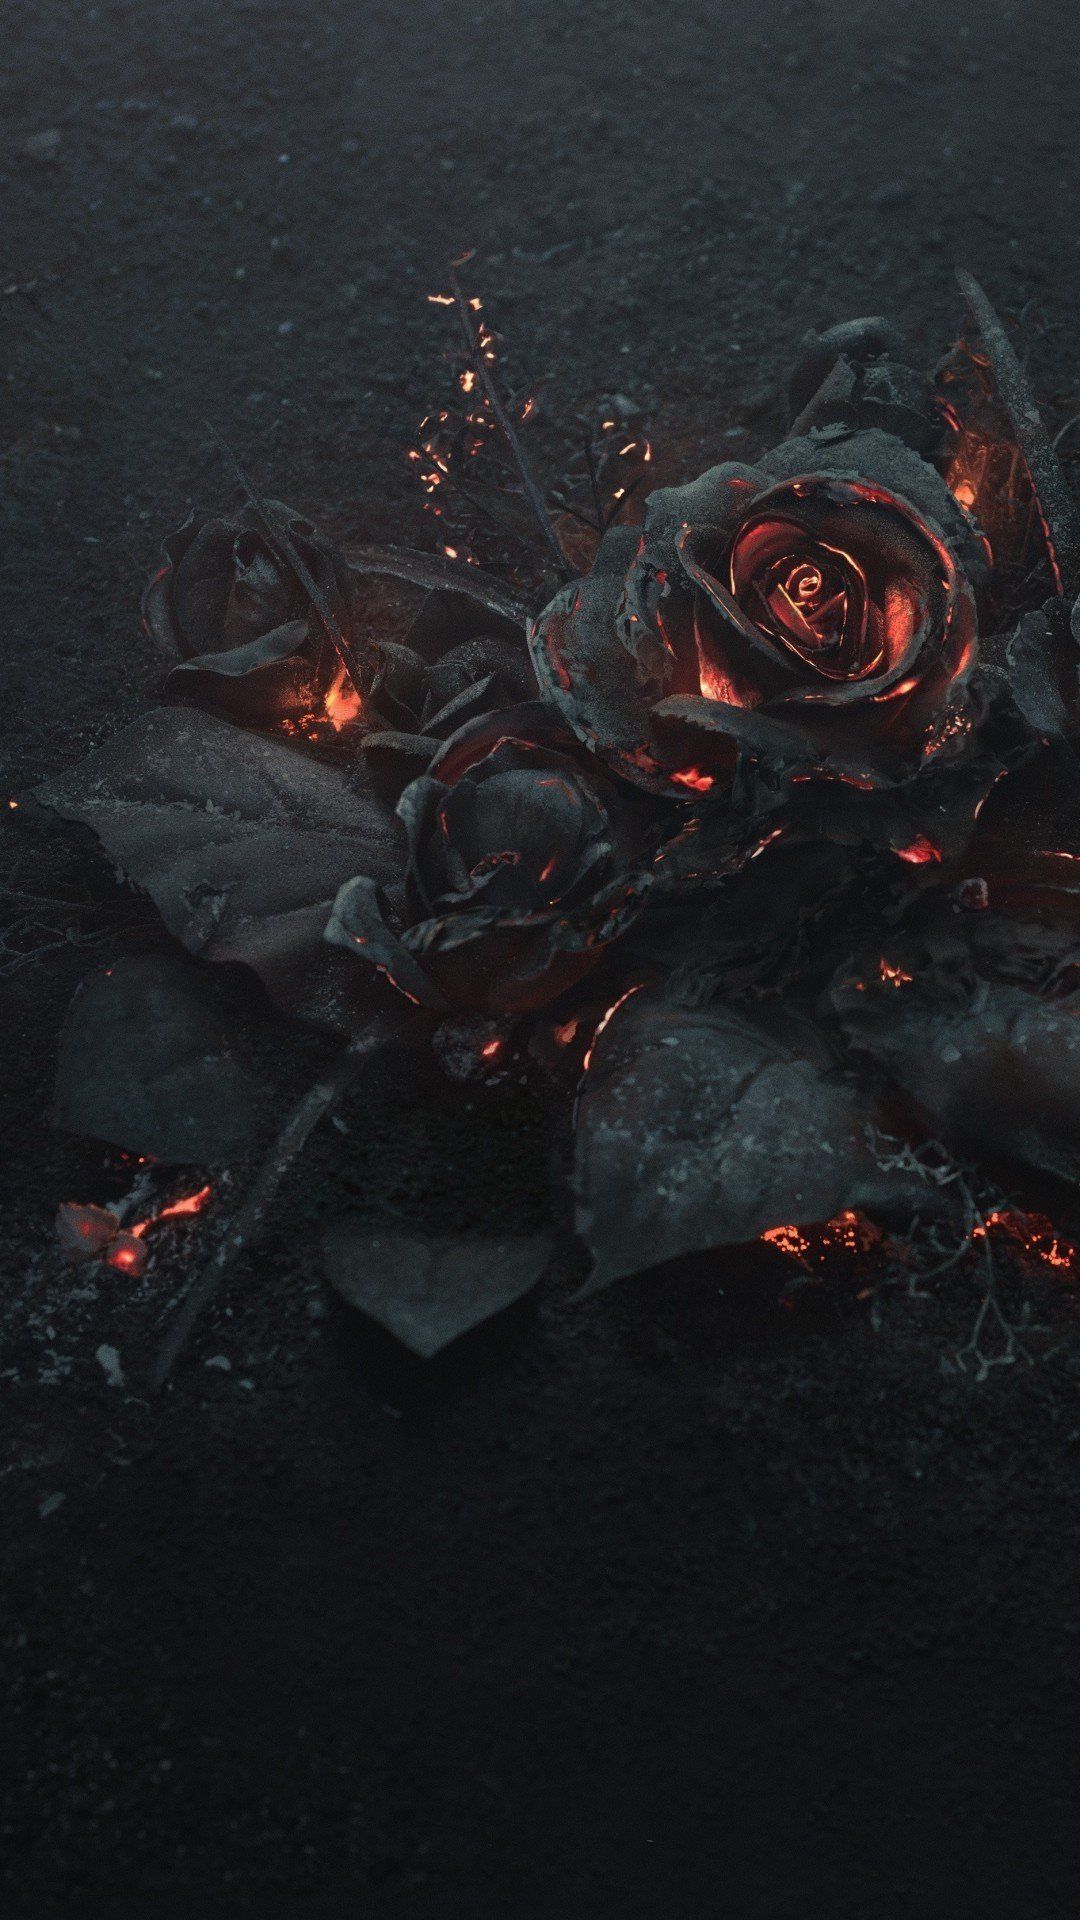 A rose on fire - Roses